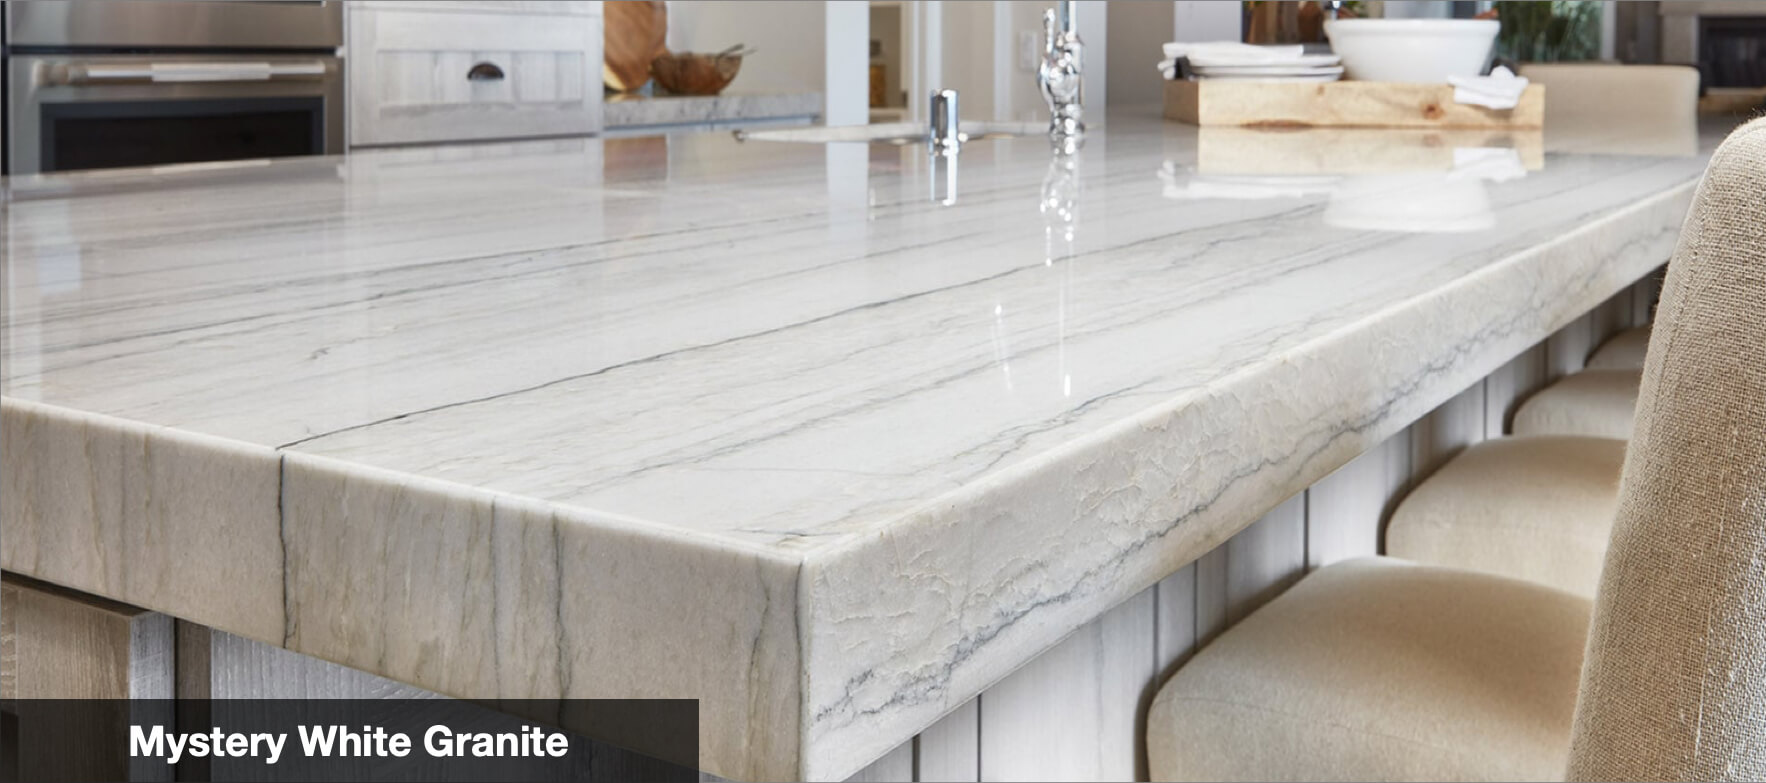 frequently asked questions about granite countertops